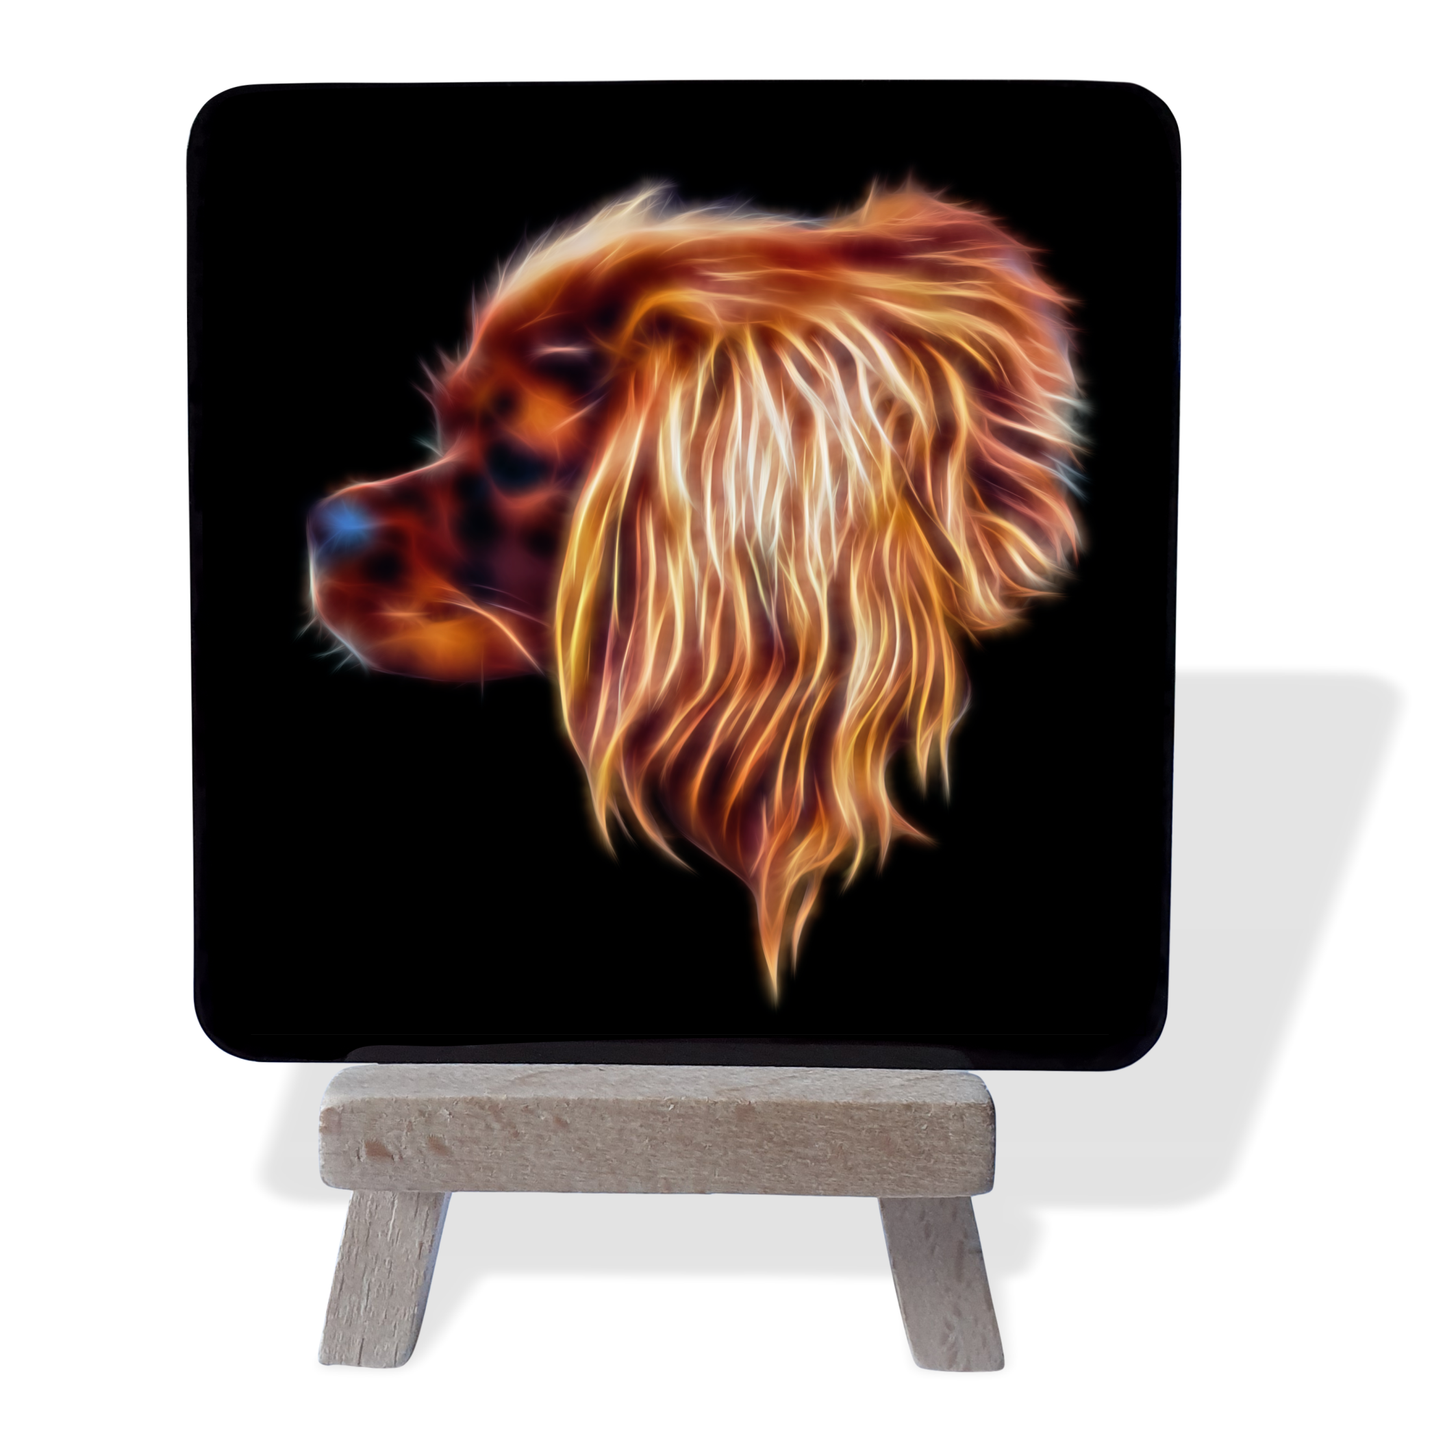 King Charles Spaniel -  Ruby King Charles Spaniel Metal Plaque and Mini Easel with Fractal Art Design